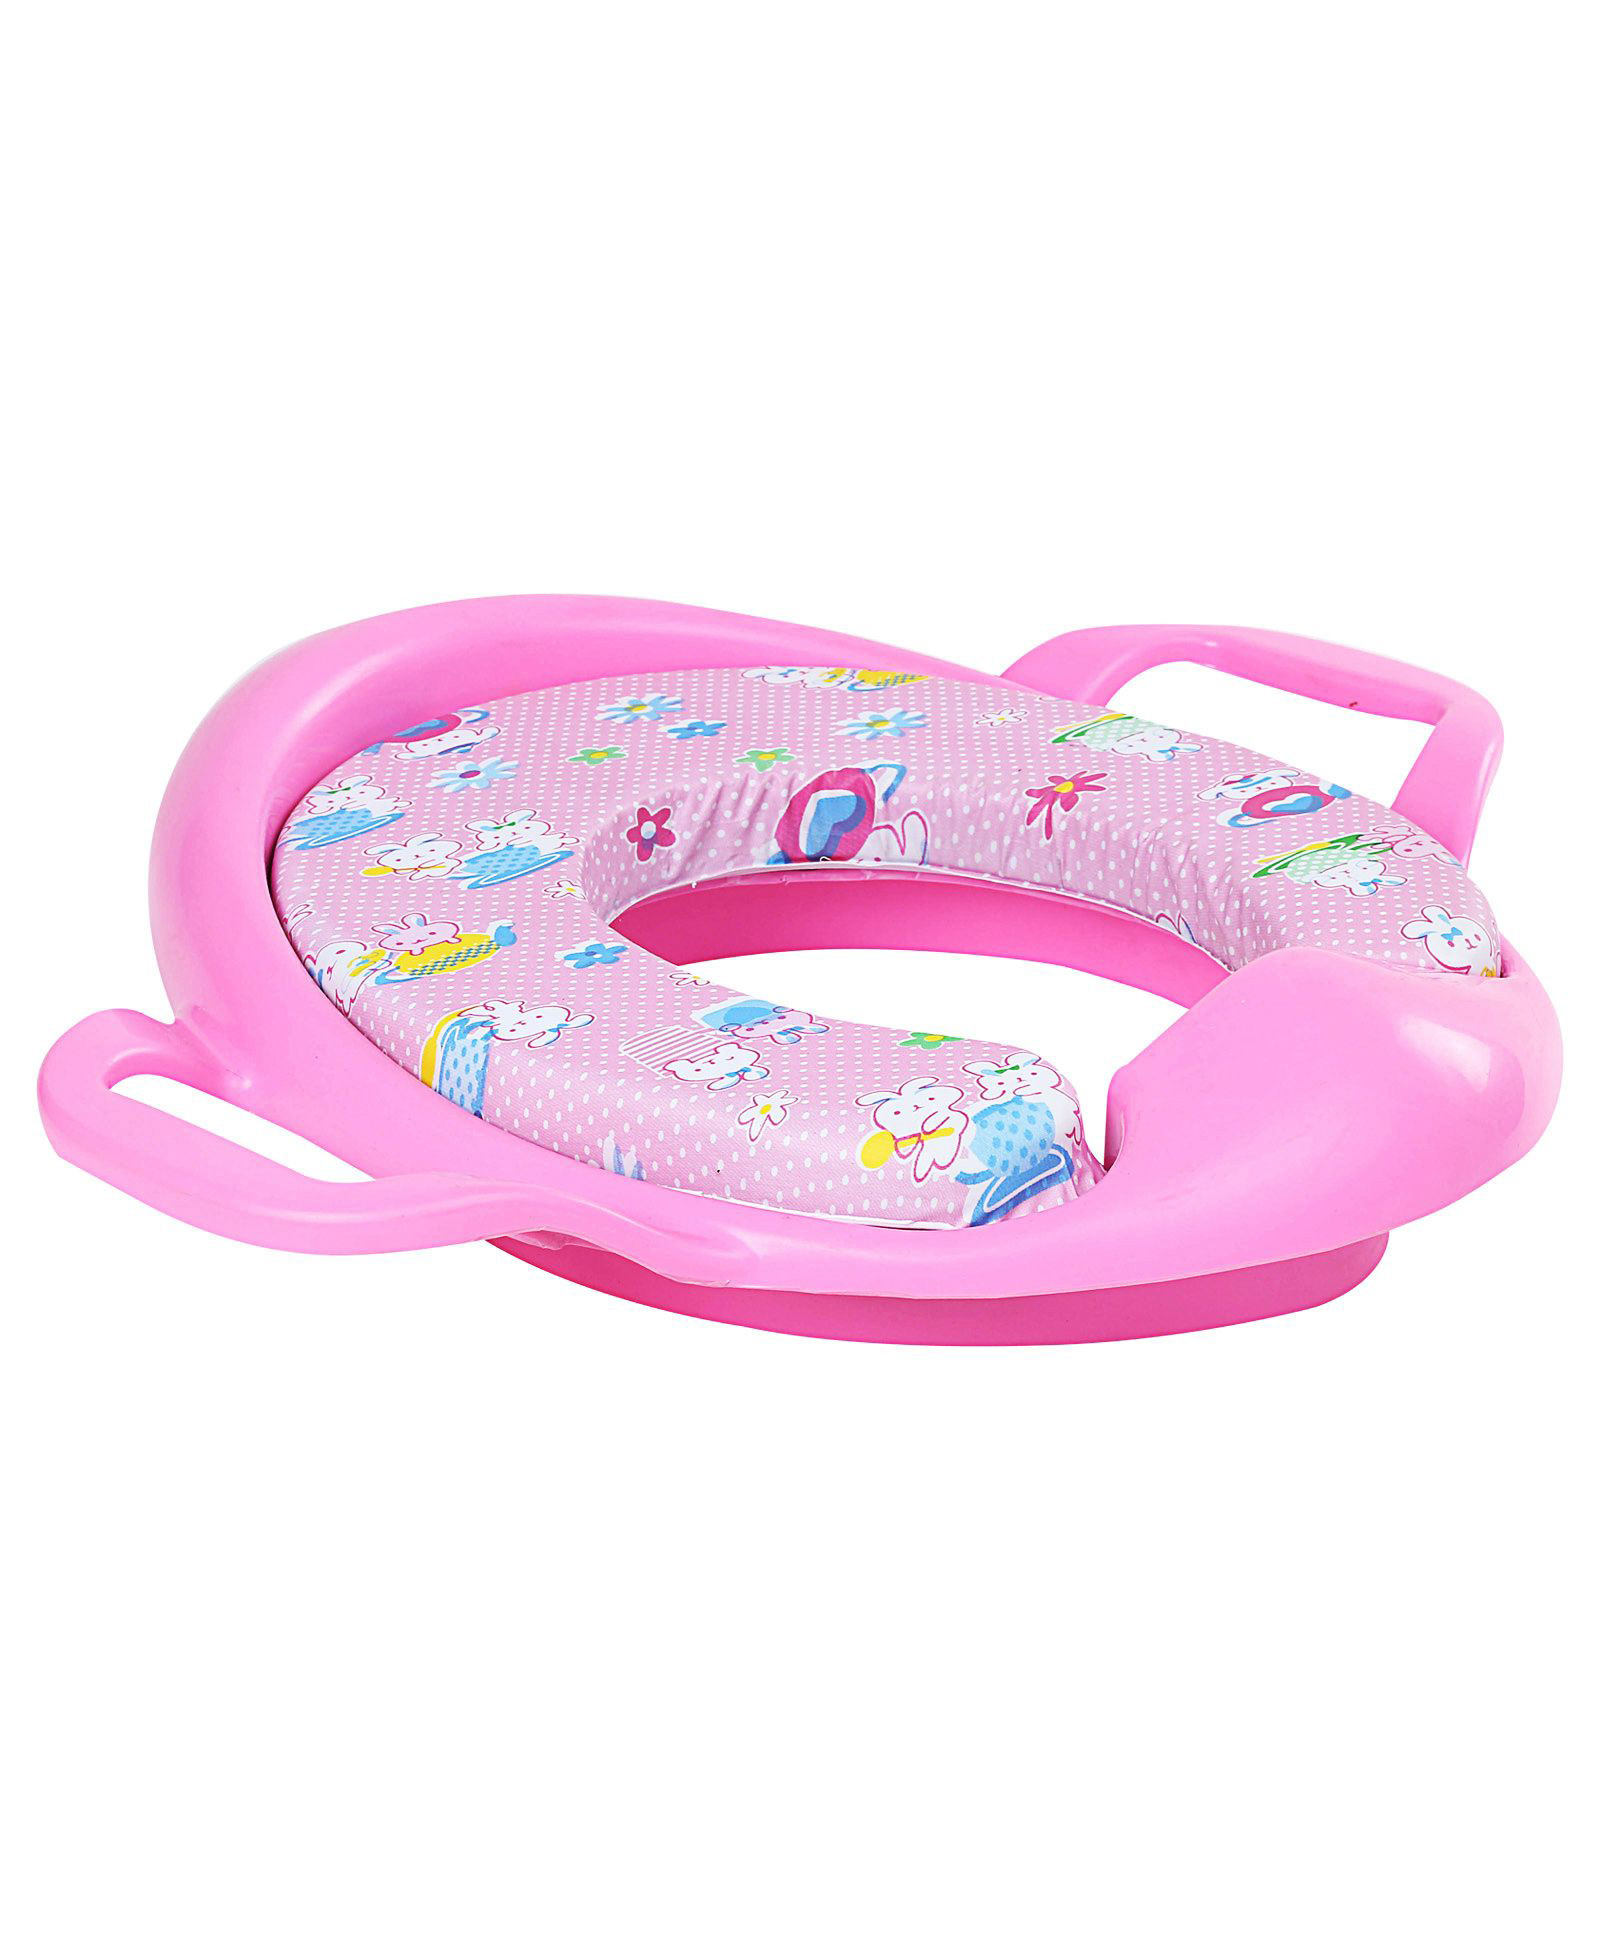 Buy Cushioned Baby Toilet Training Potty Seat With Handles Pink Online